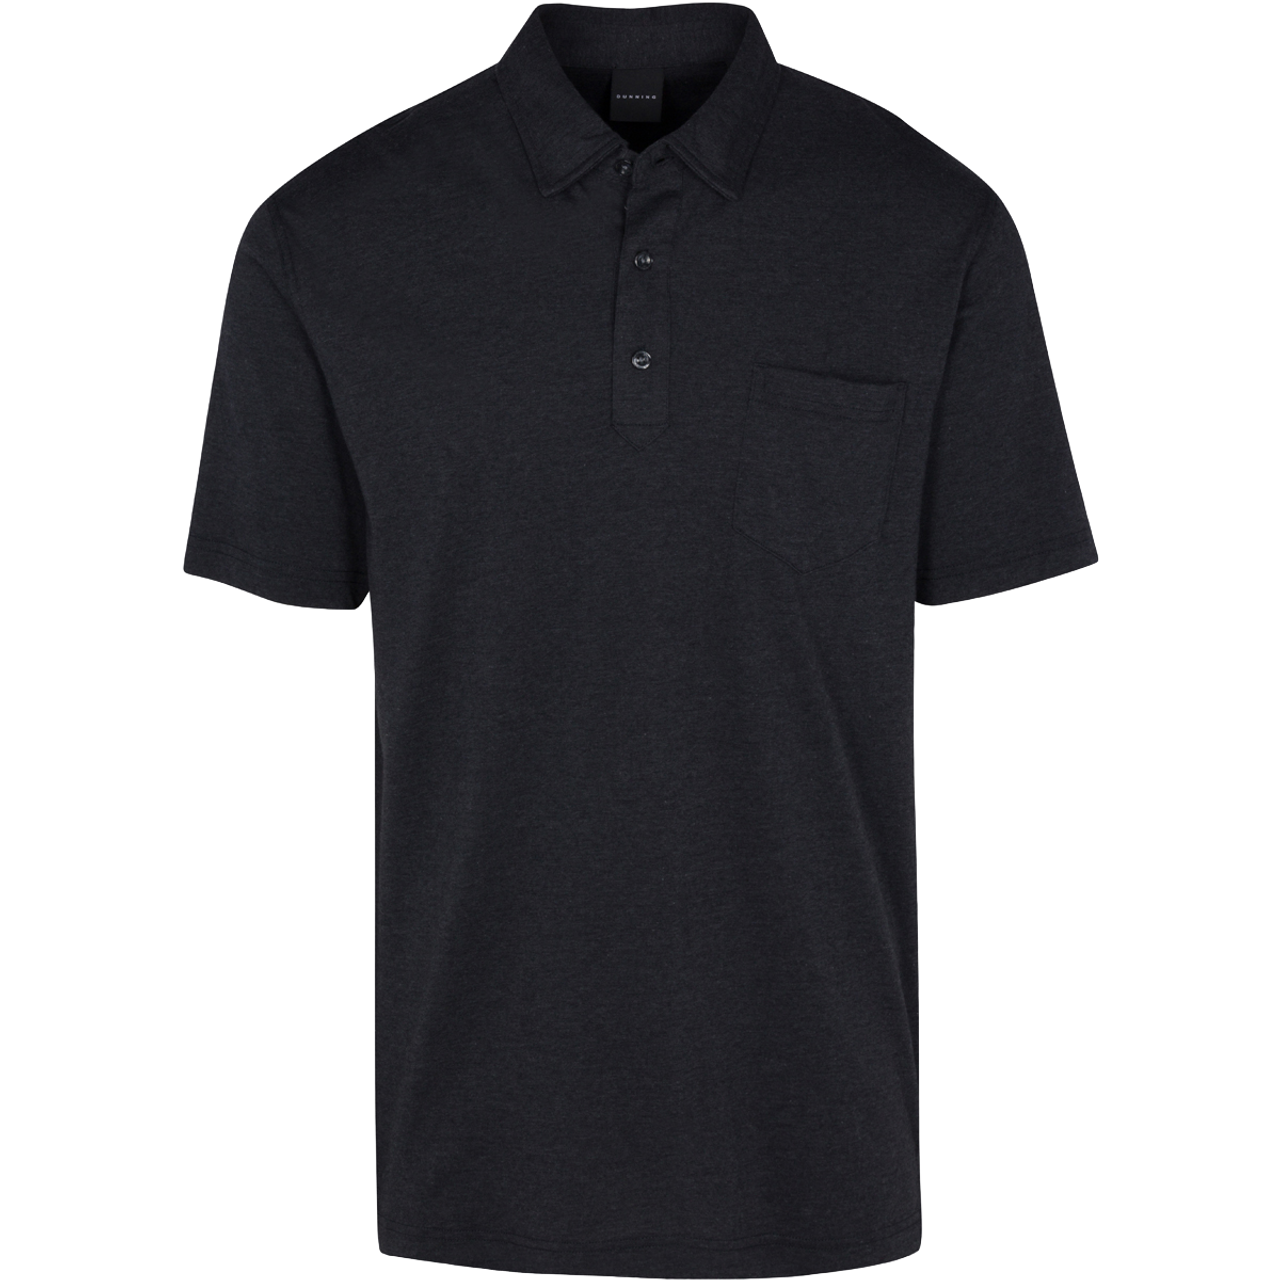 Witham Performance Pocket Polo - Dunning